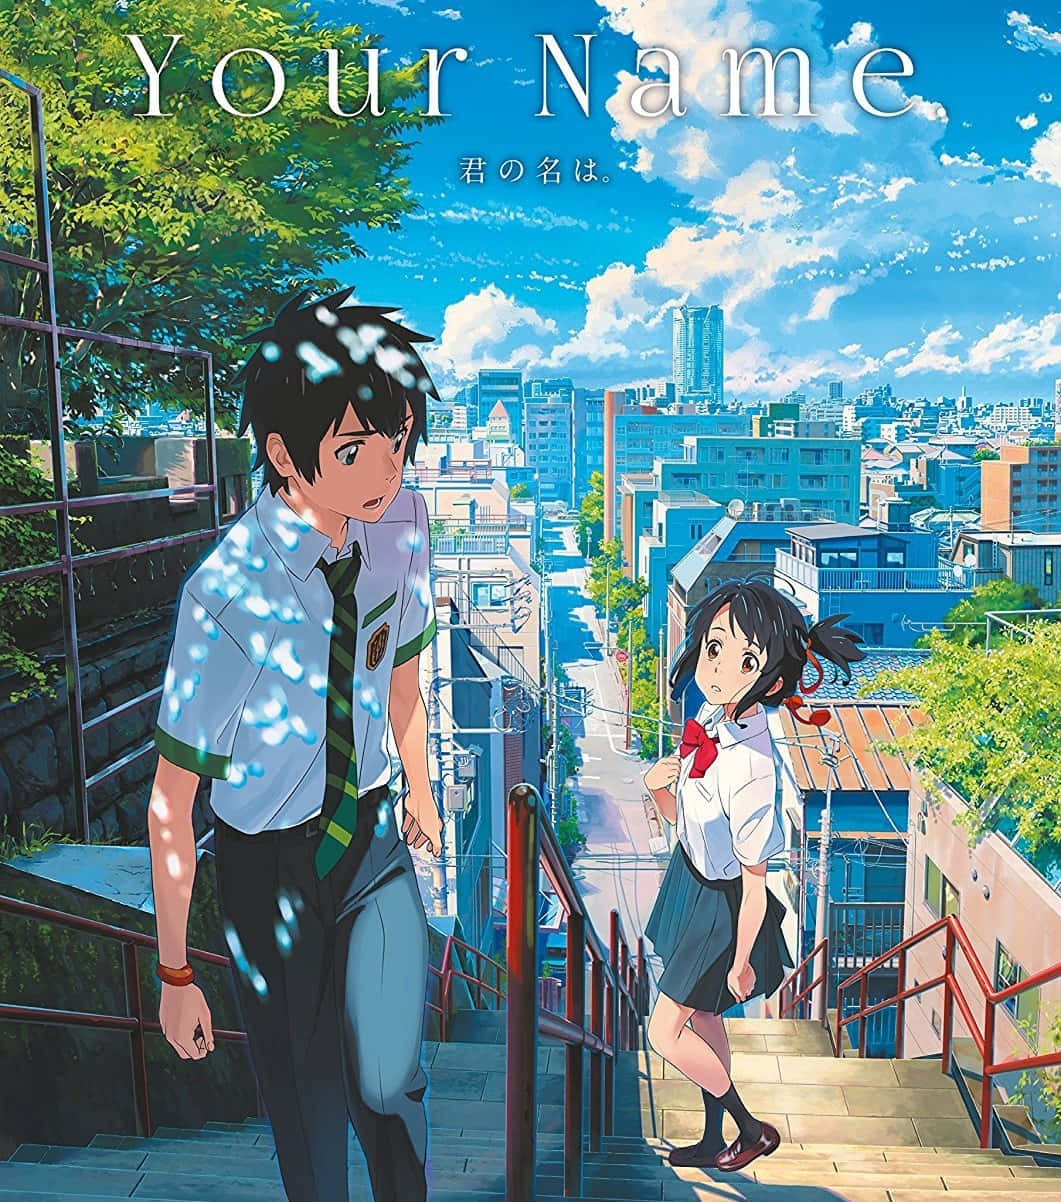 Download Two contrasting yet connected characters in Kimi No Na Wa